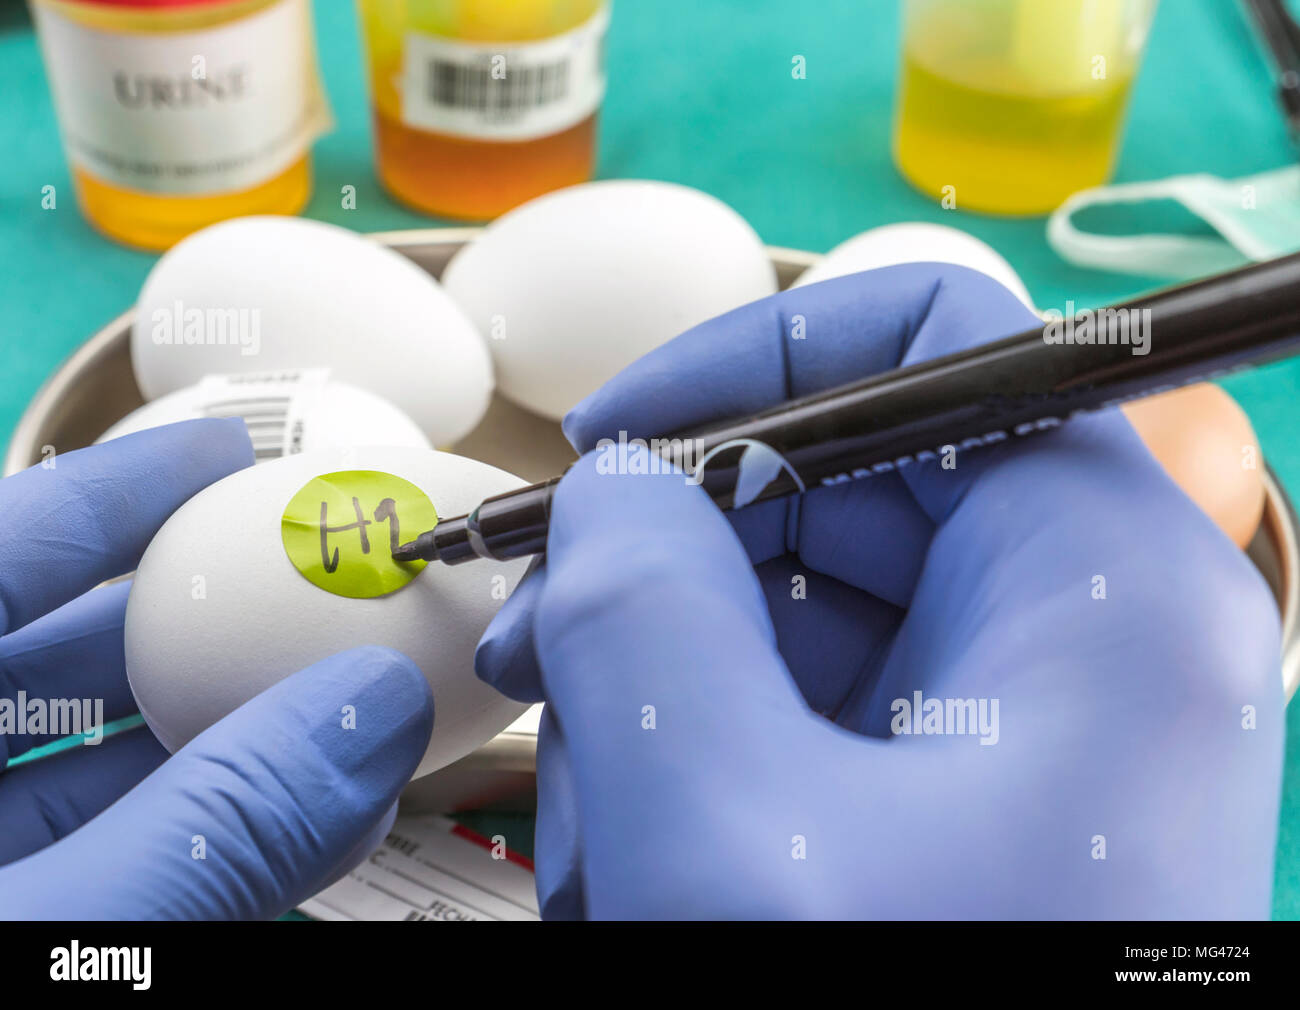 Scientific brand with label eggs in poor condition to examine in the laboratory, clinical, conceptual image Stock Photo